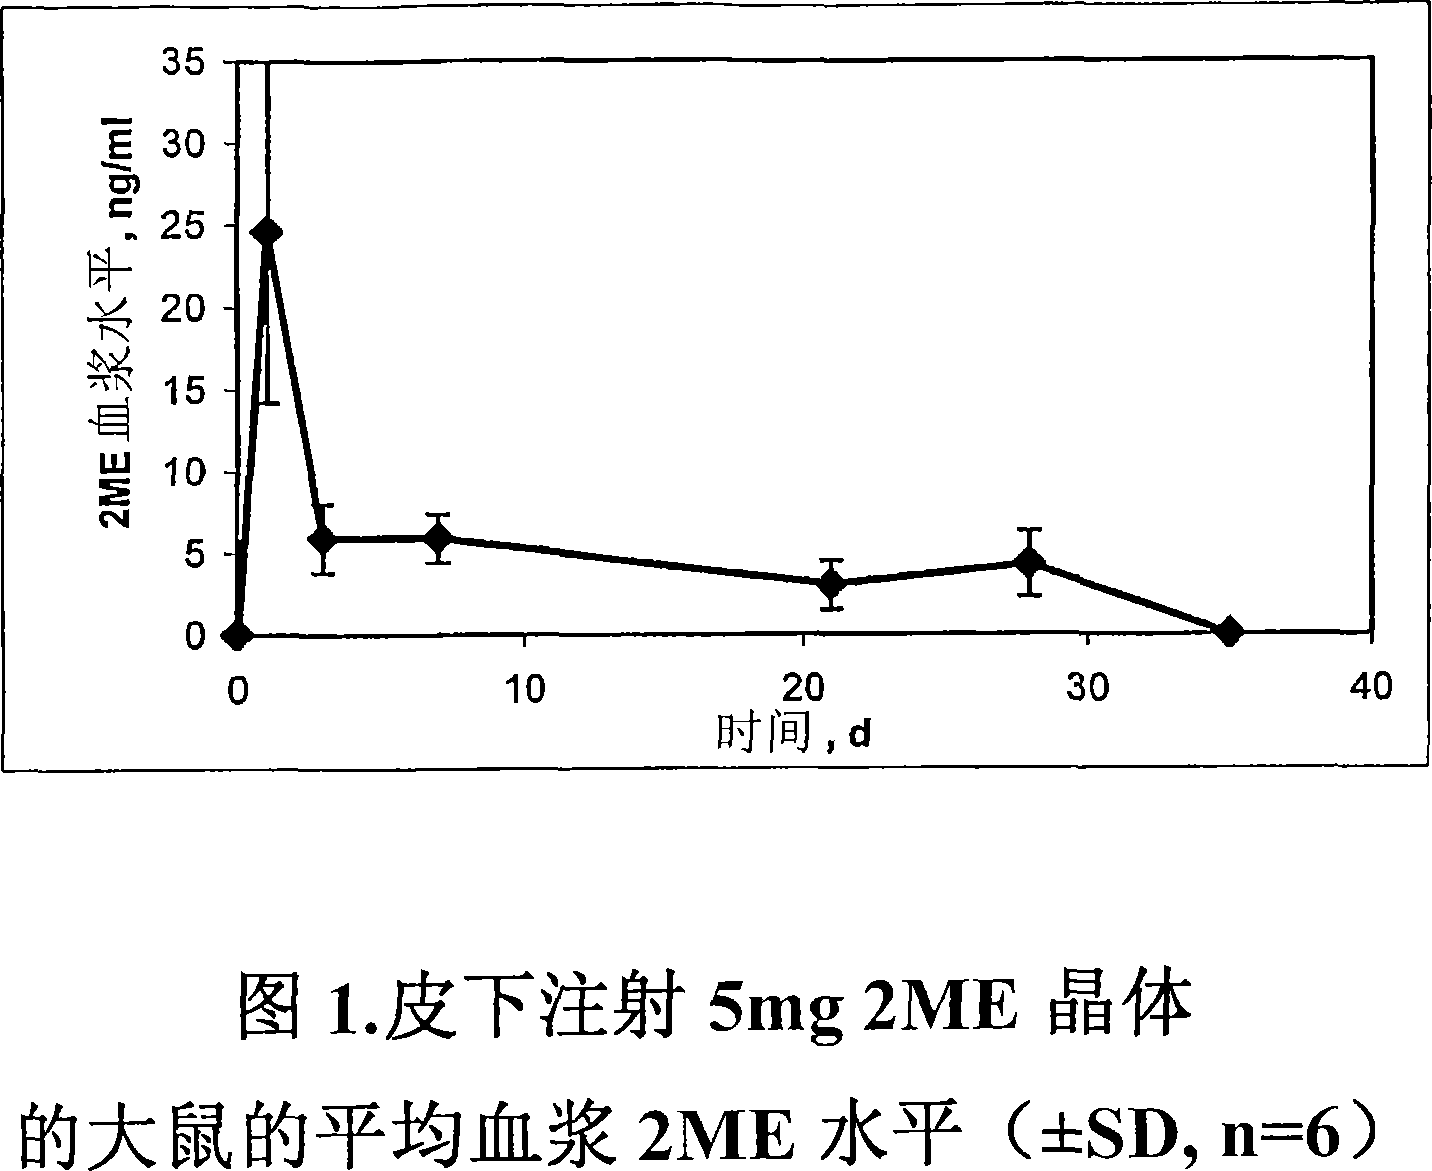 Long acting injectable crystal formulations of estradiol metabolites and methods of using same